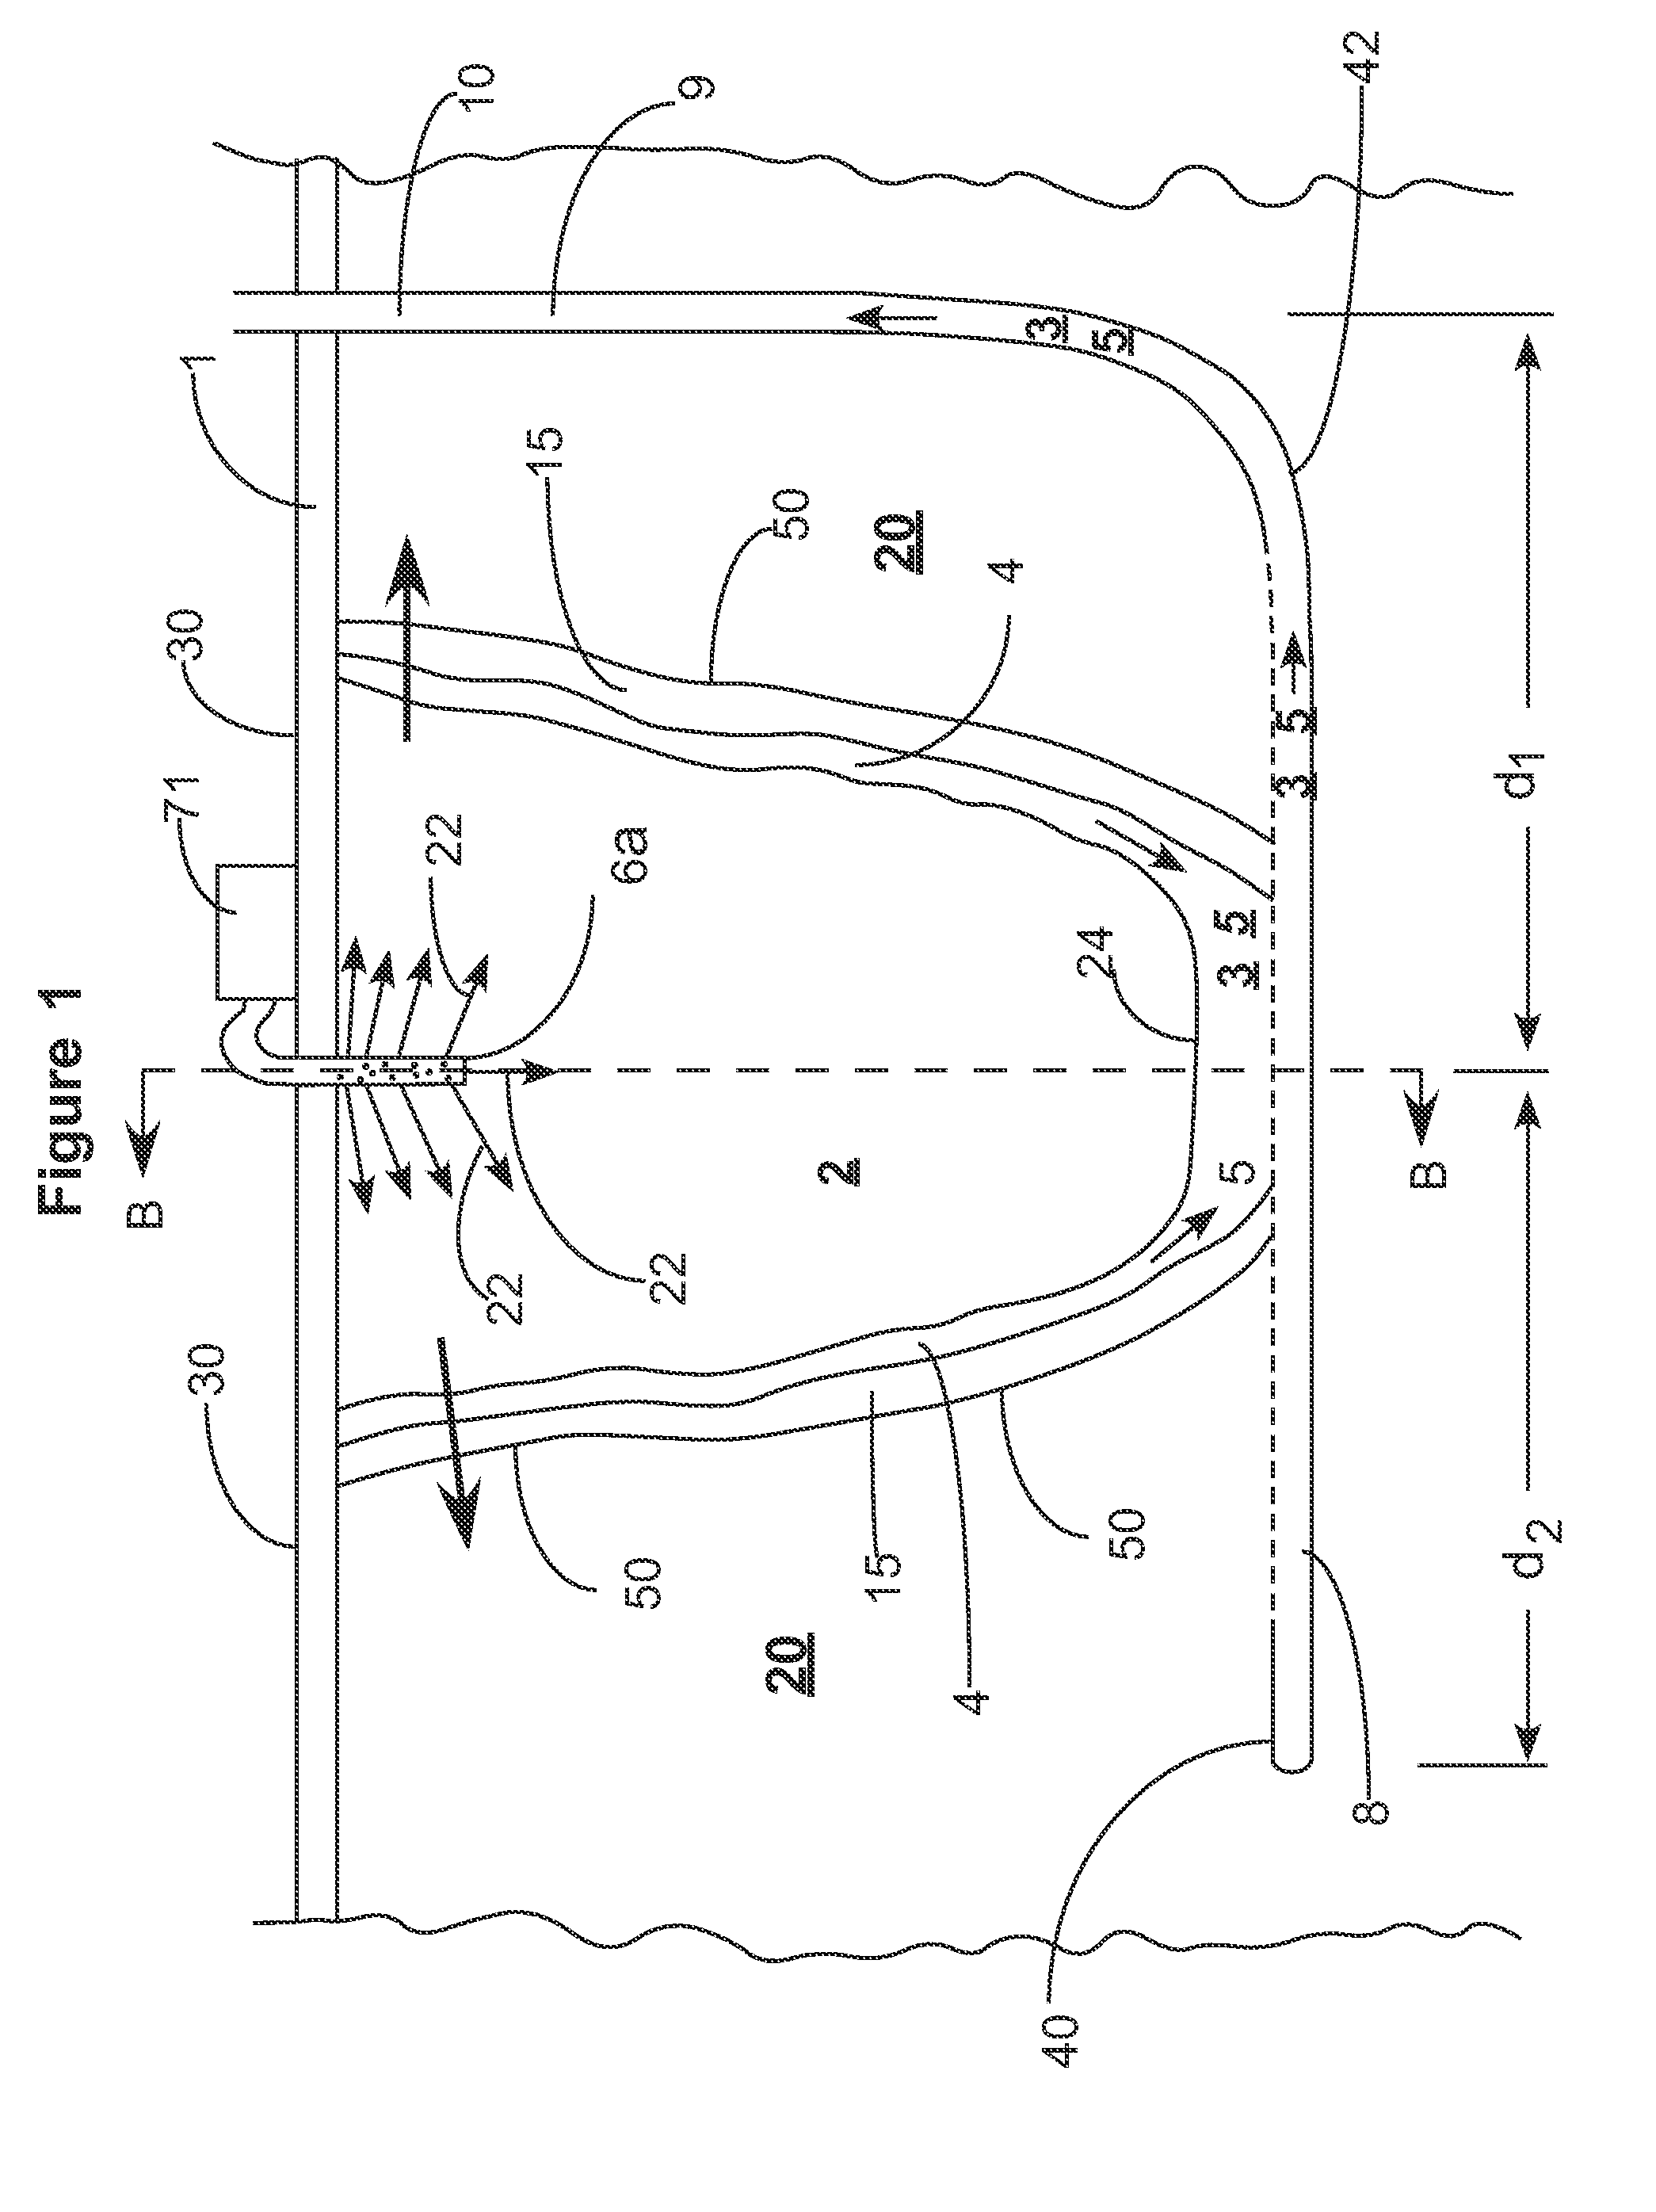 In-situ combustion recovery process using single horizontal well to produce oil and combustion gases to surface